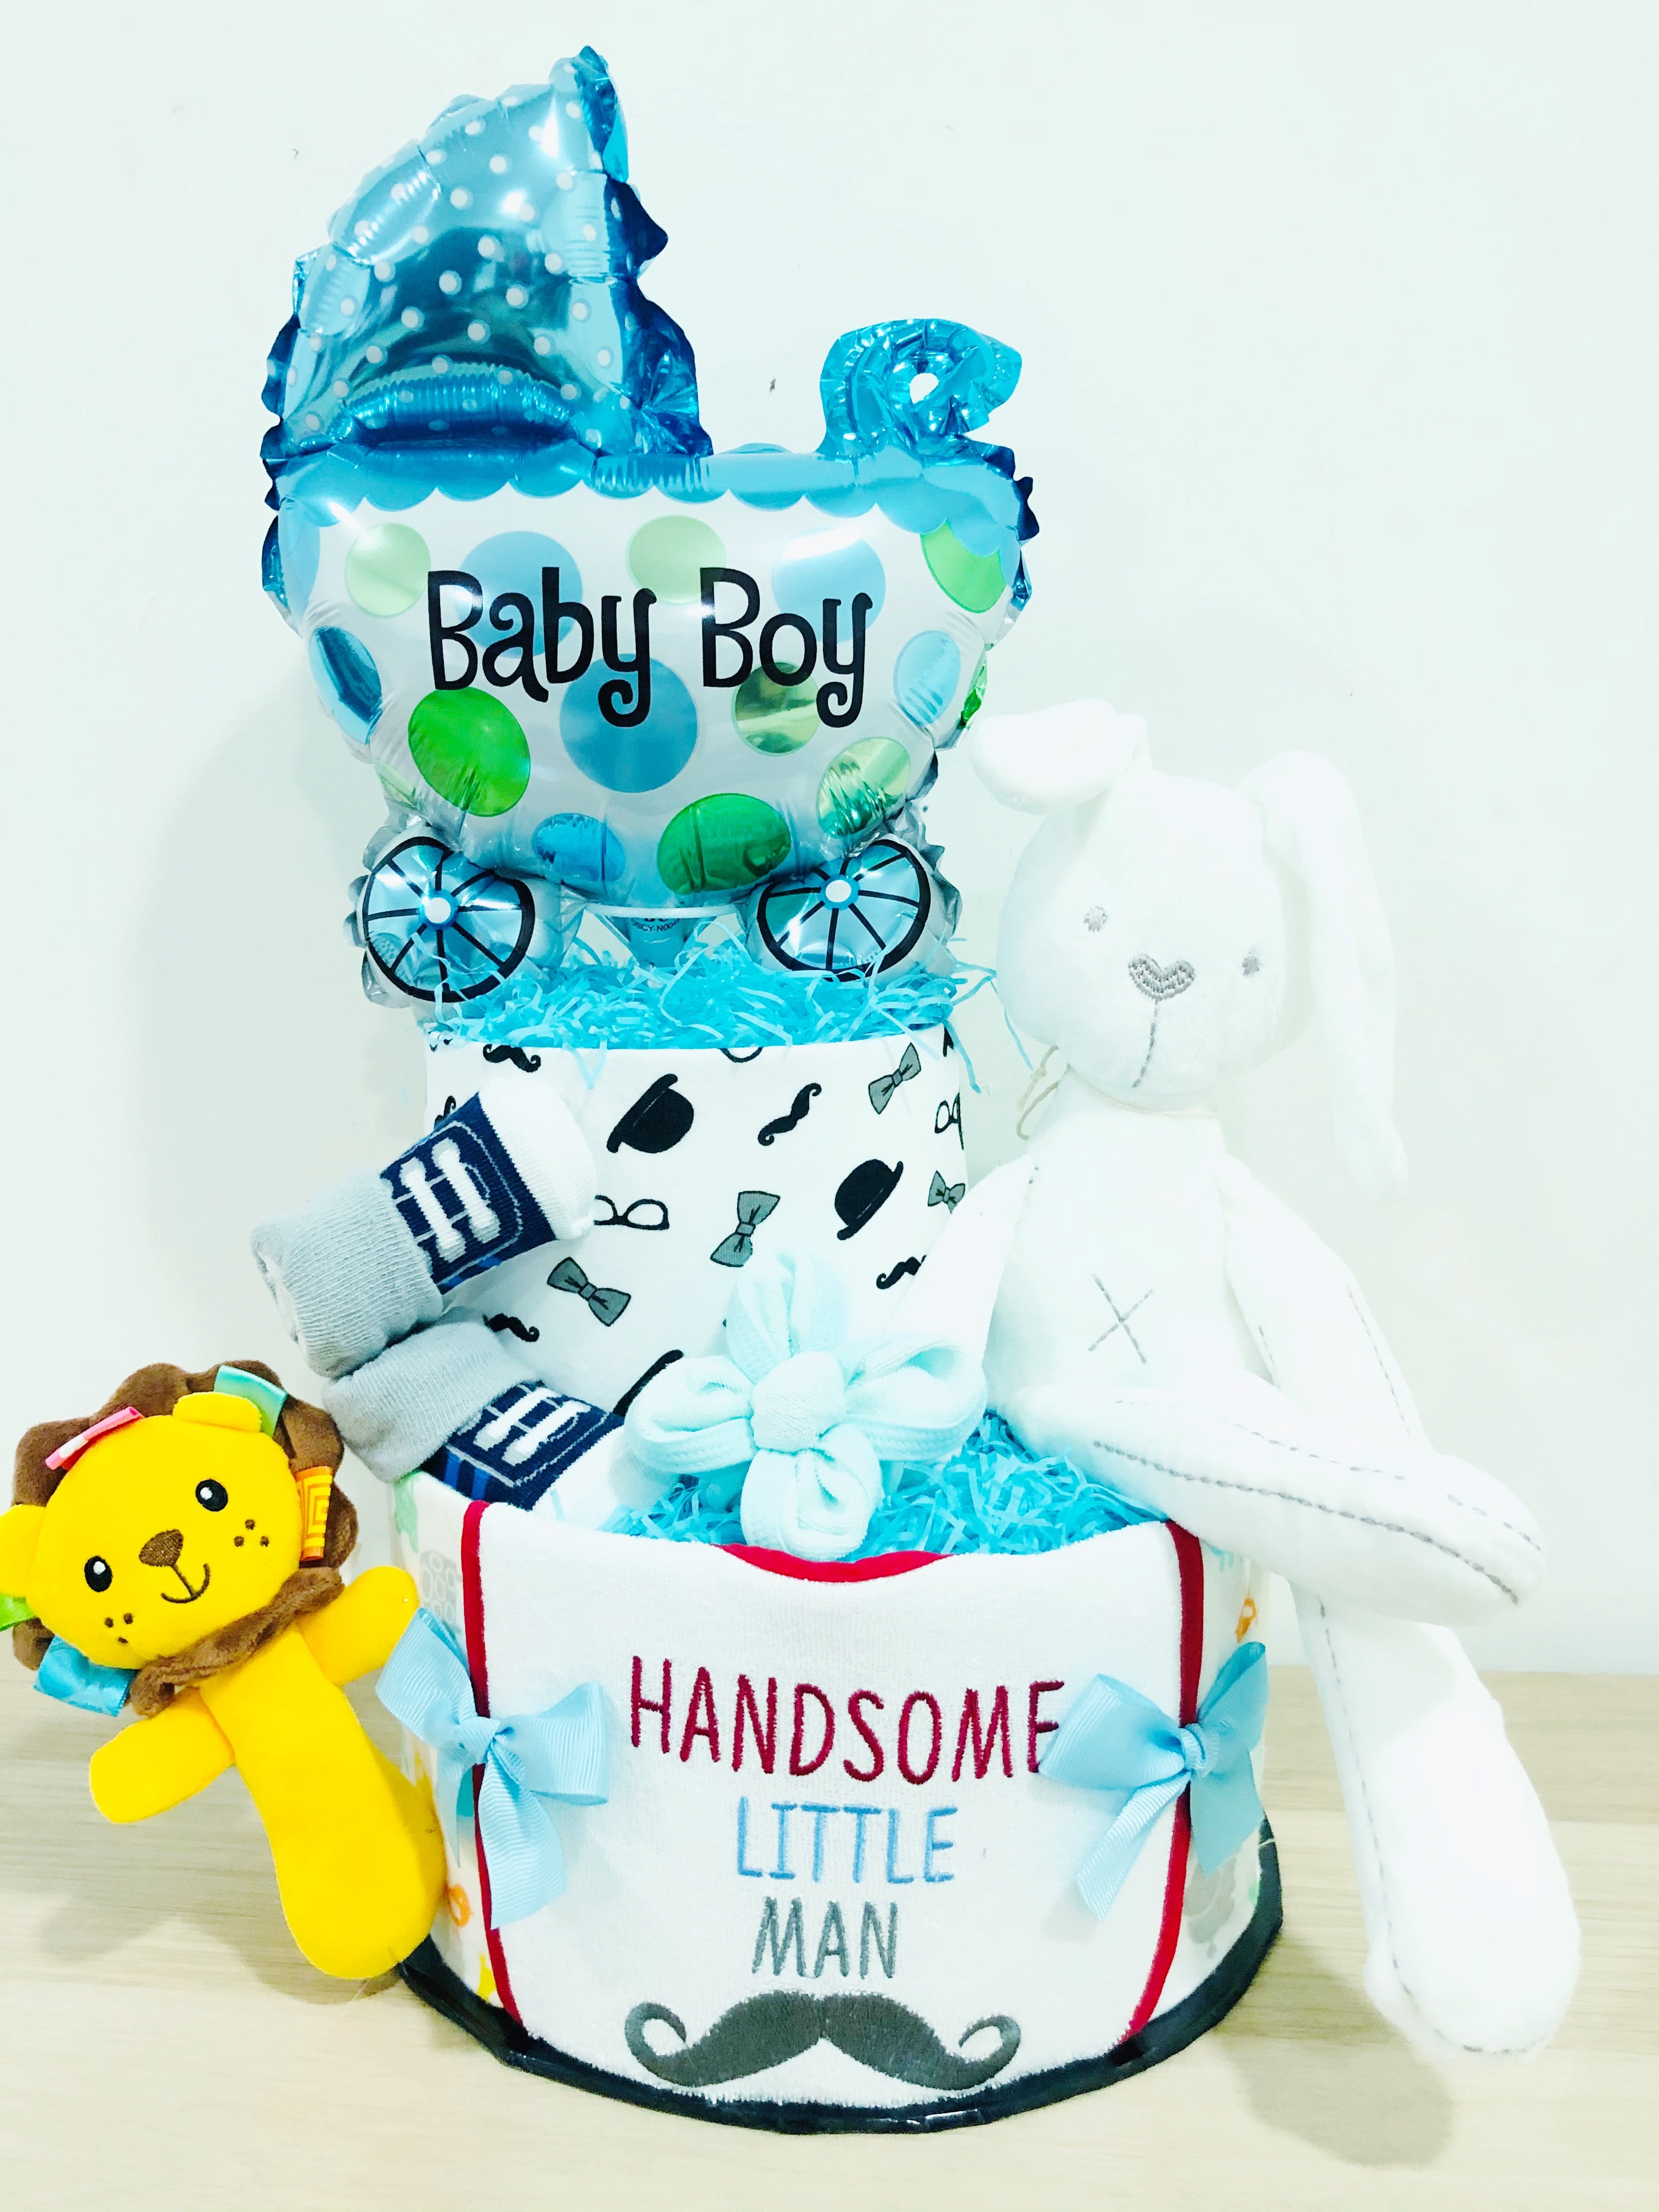 How to Make a Diaper Cake | Step By Step Tutorial - YouTube